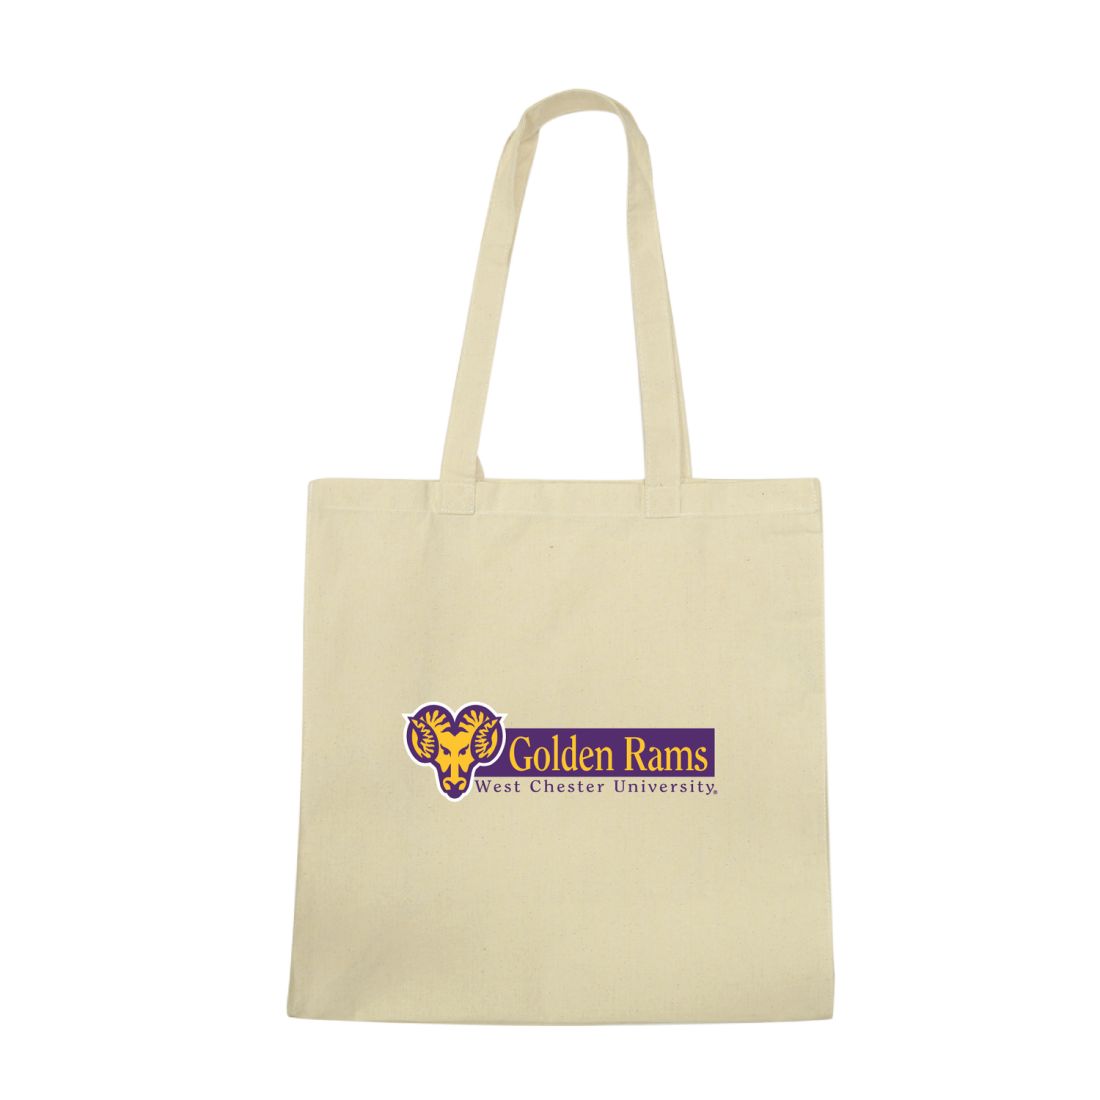 West Chester University Golden Rams Institutional Tote Bag